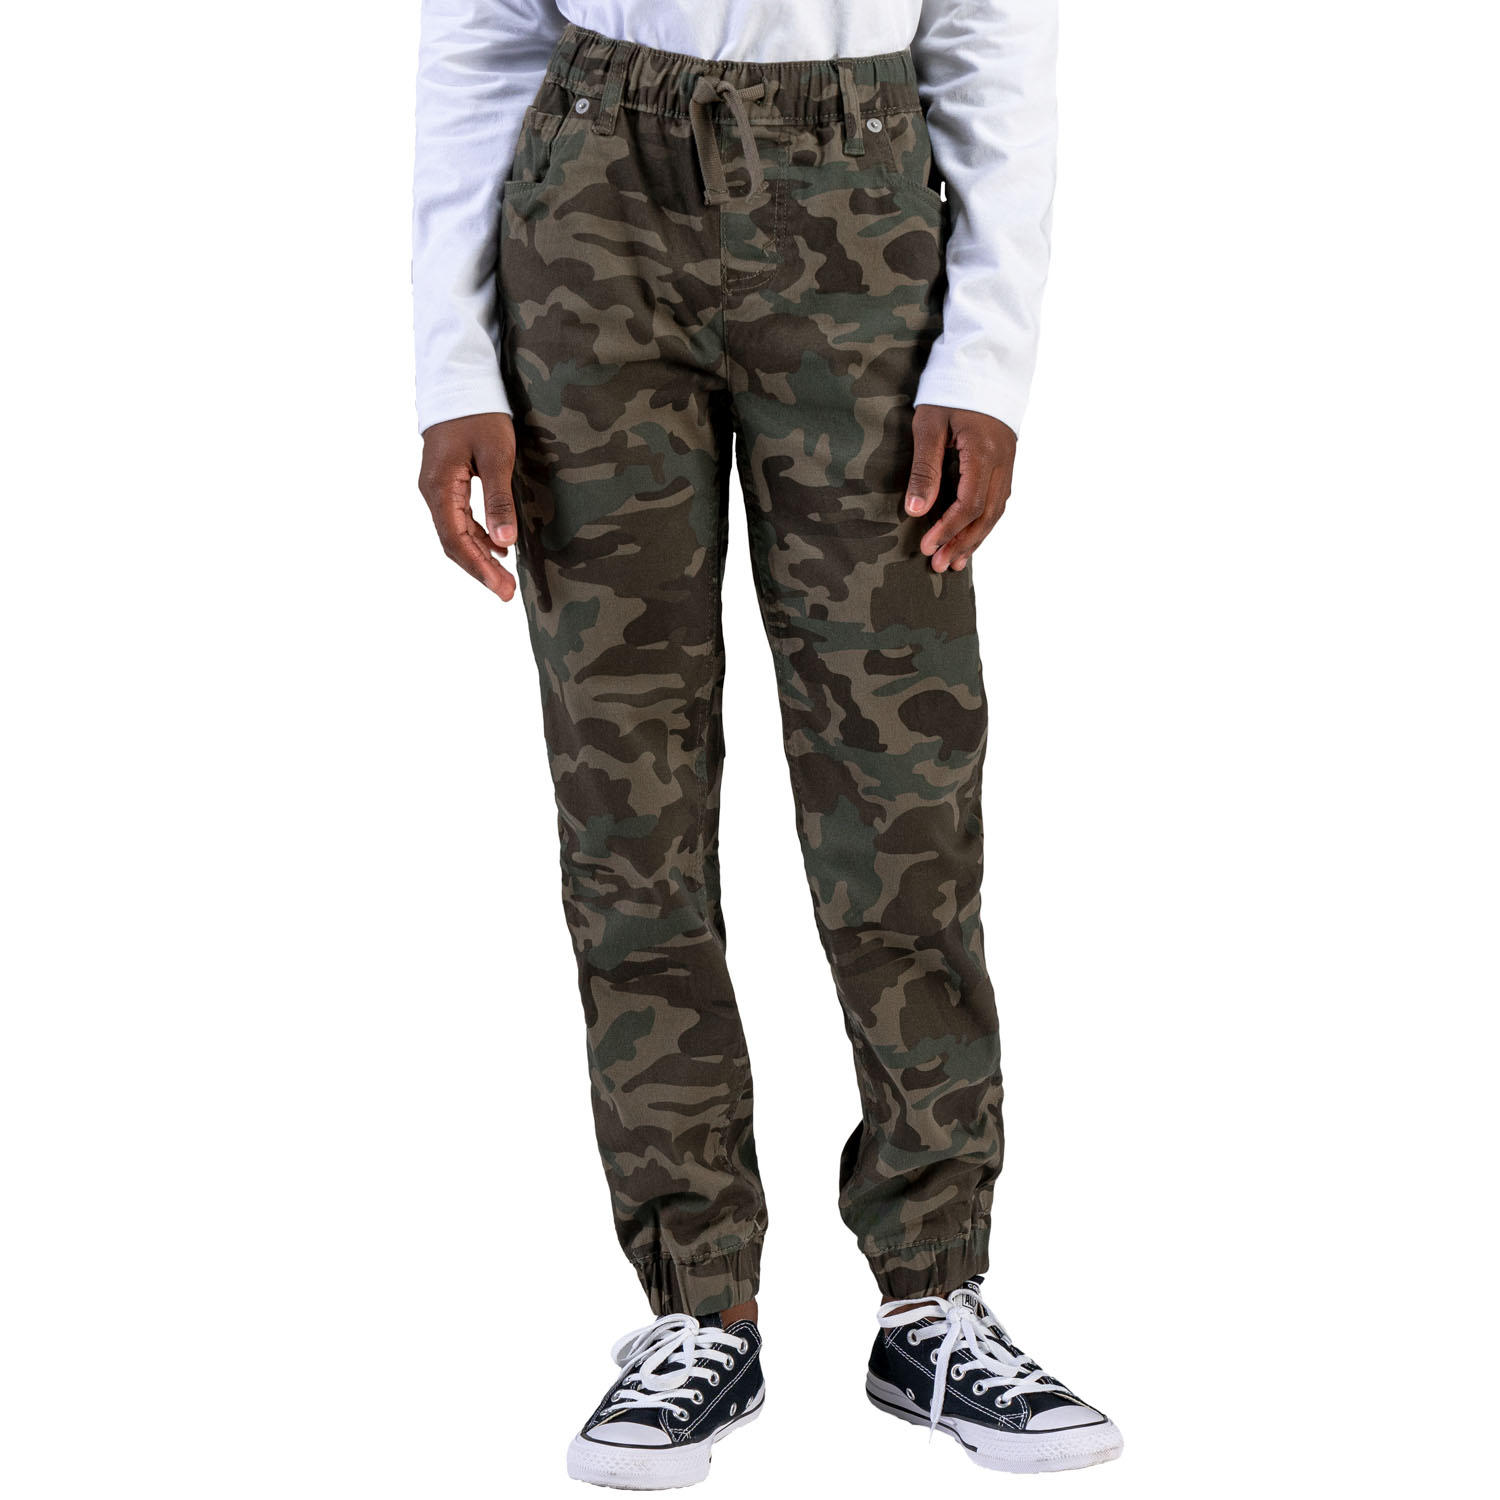 Sam's Club Members: Levi's Boys' Twill Jogger Pants (Olive Night/Forest Camo) $3.80 + Free Shipping for Plus Members